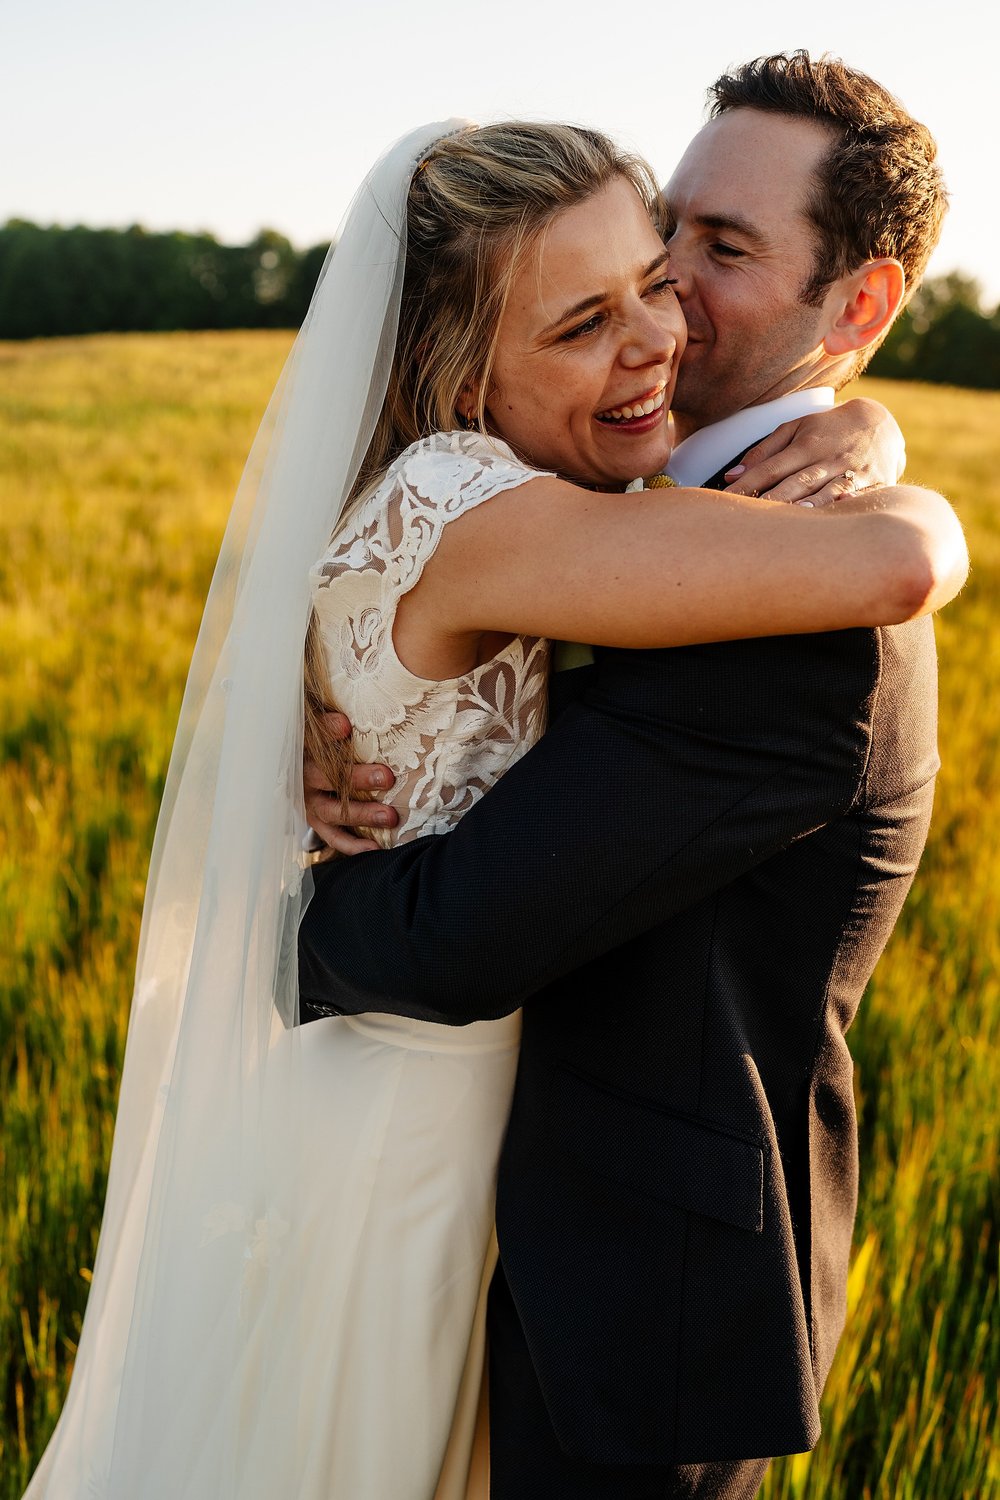 Cotswolds wedding photography at Leys Farm, Swerford.